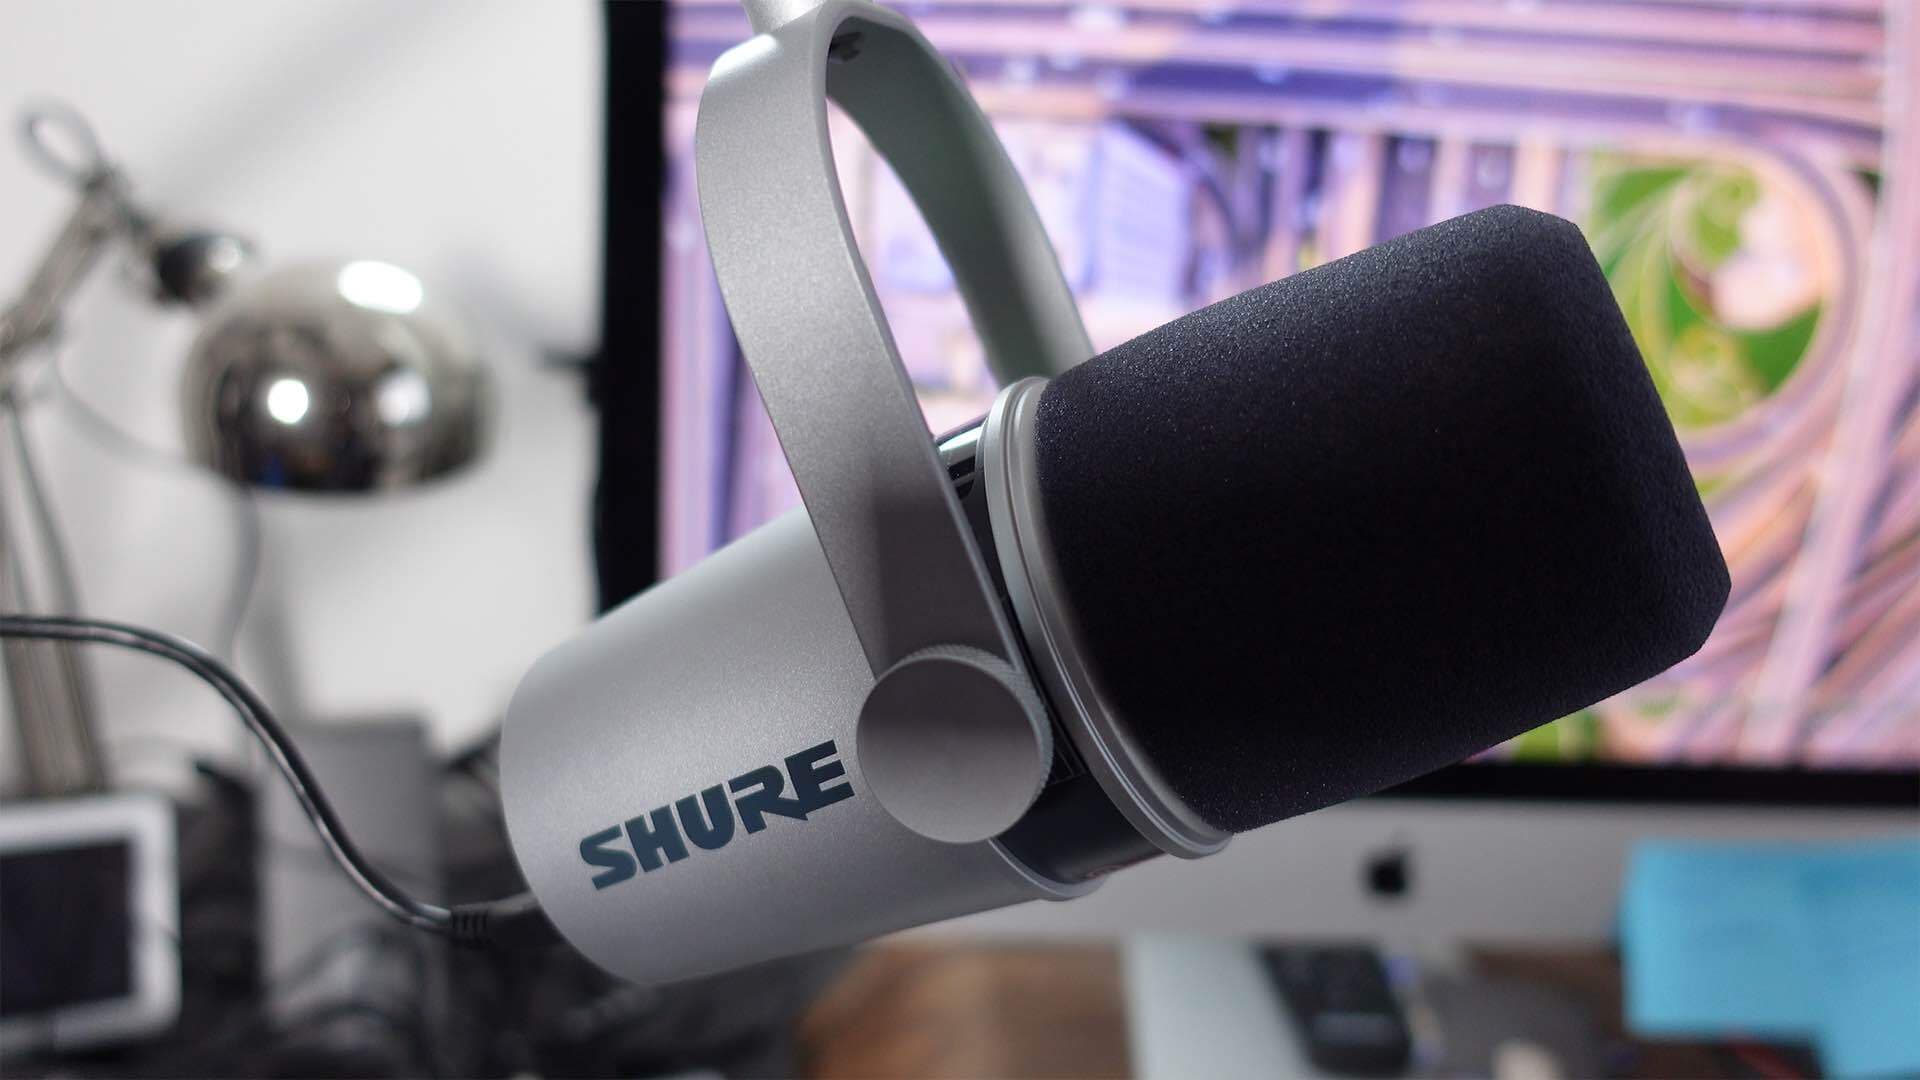 Image shows a silver Shure MV7, side on and hanging from a boom arm. In the background is a computer and desk lamp.